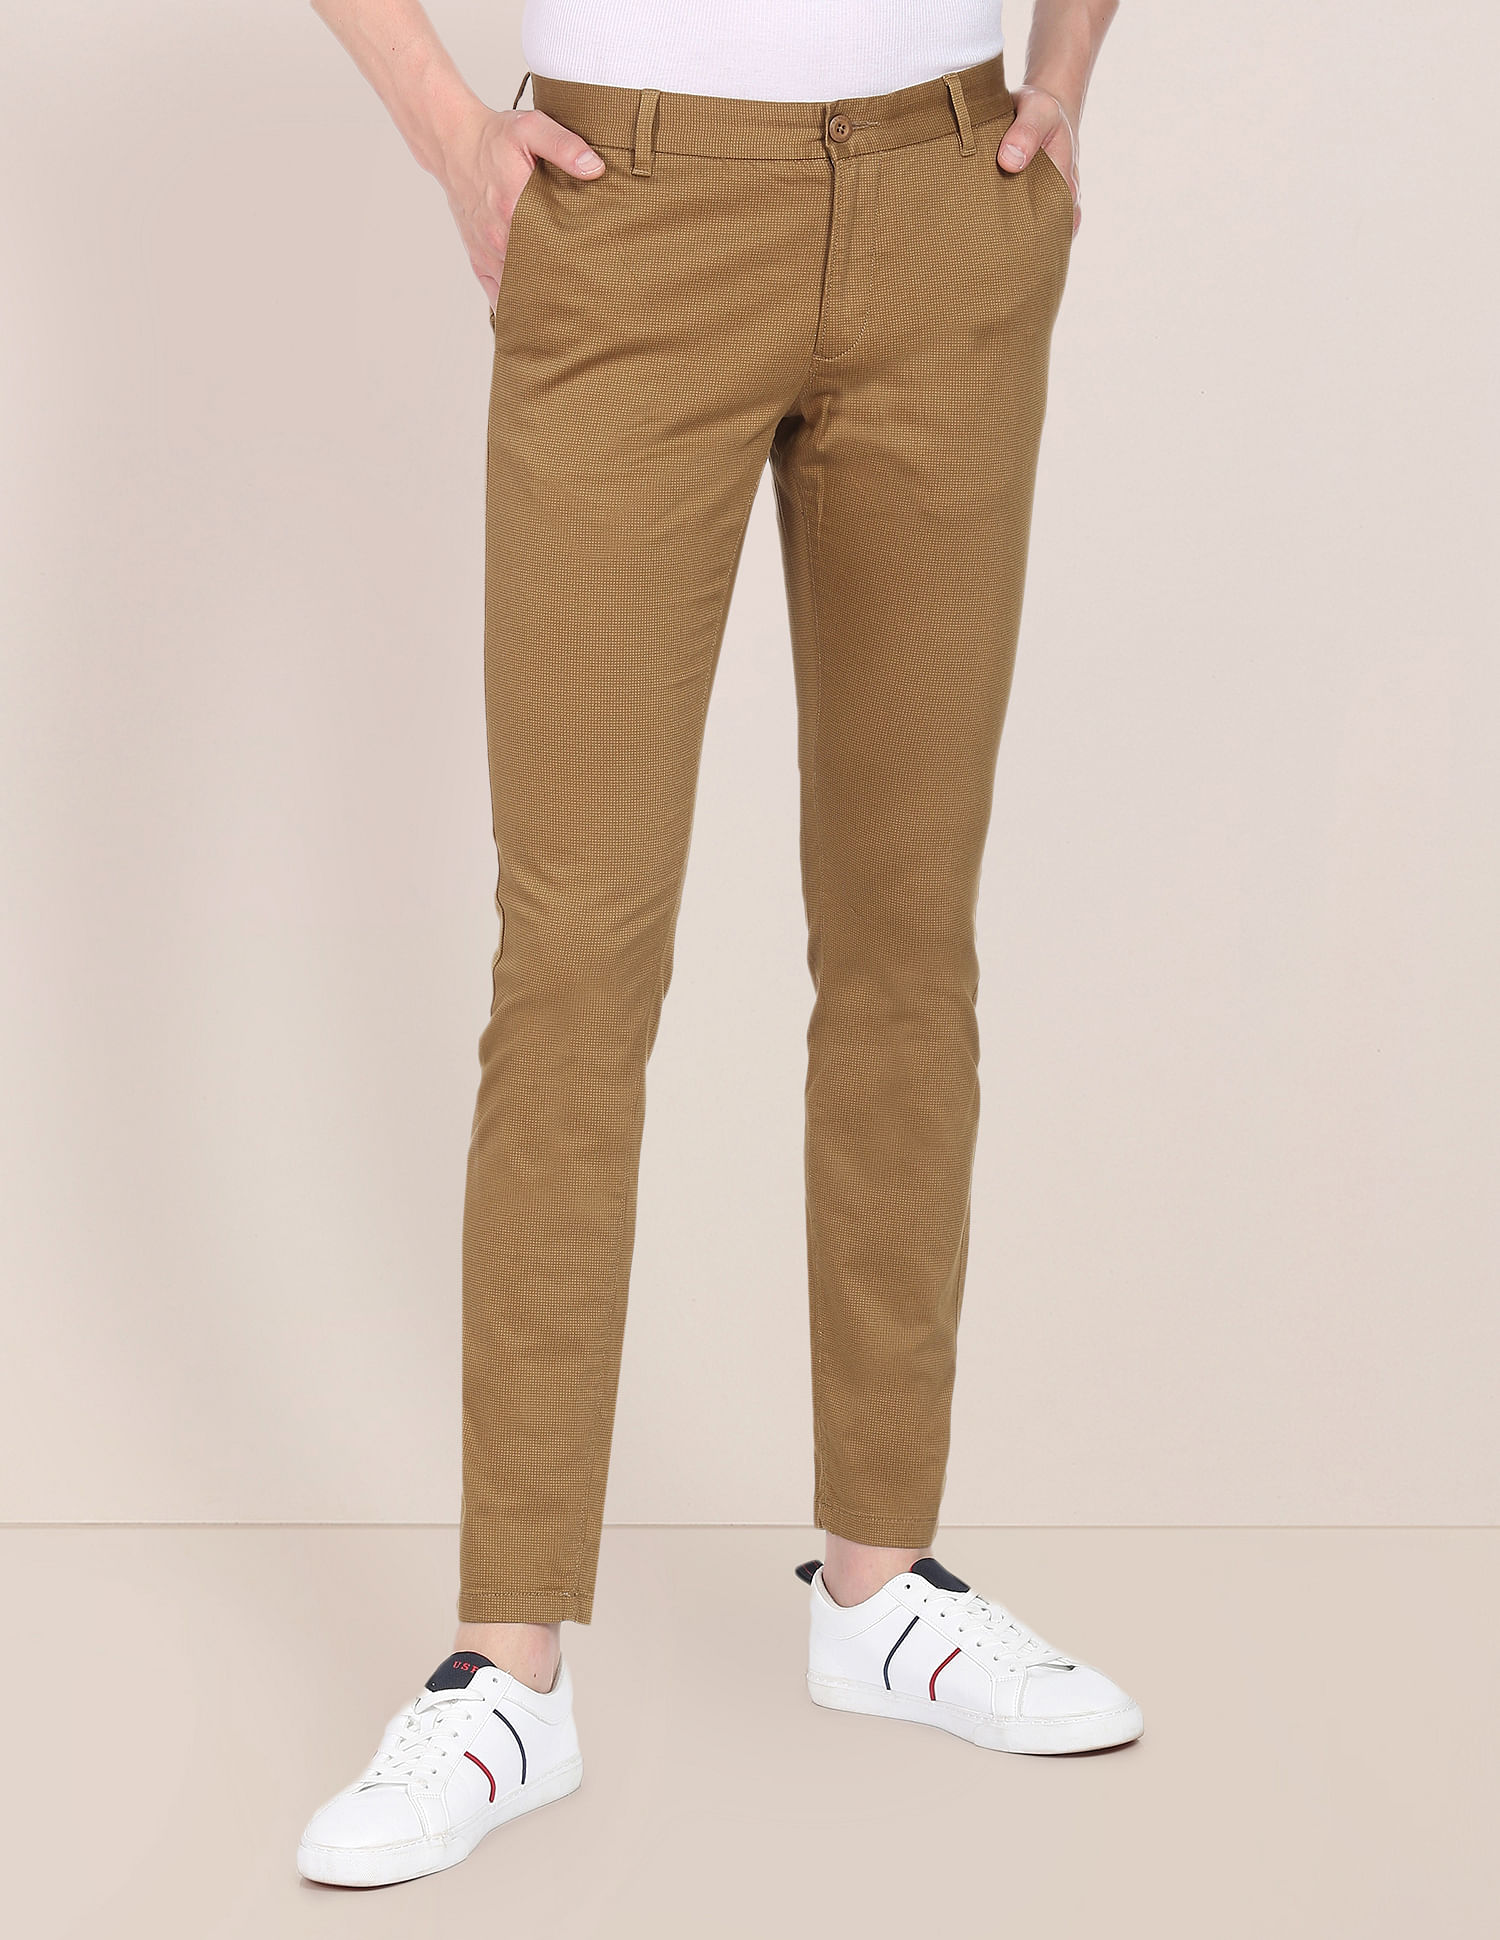 Mens Ankle Length Business Dress Pants For Summer Office And Social Wear  Streetwear Casual Formal Trousers For Men 210527 From Dou04, $33.4 |  DHgate.Com